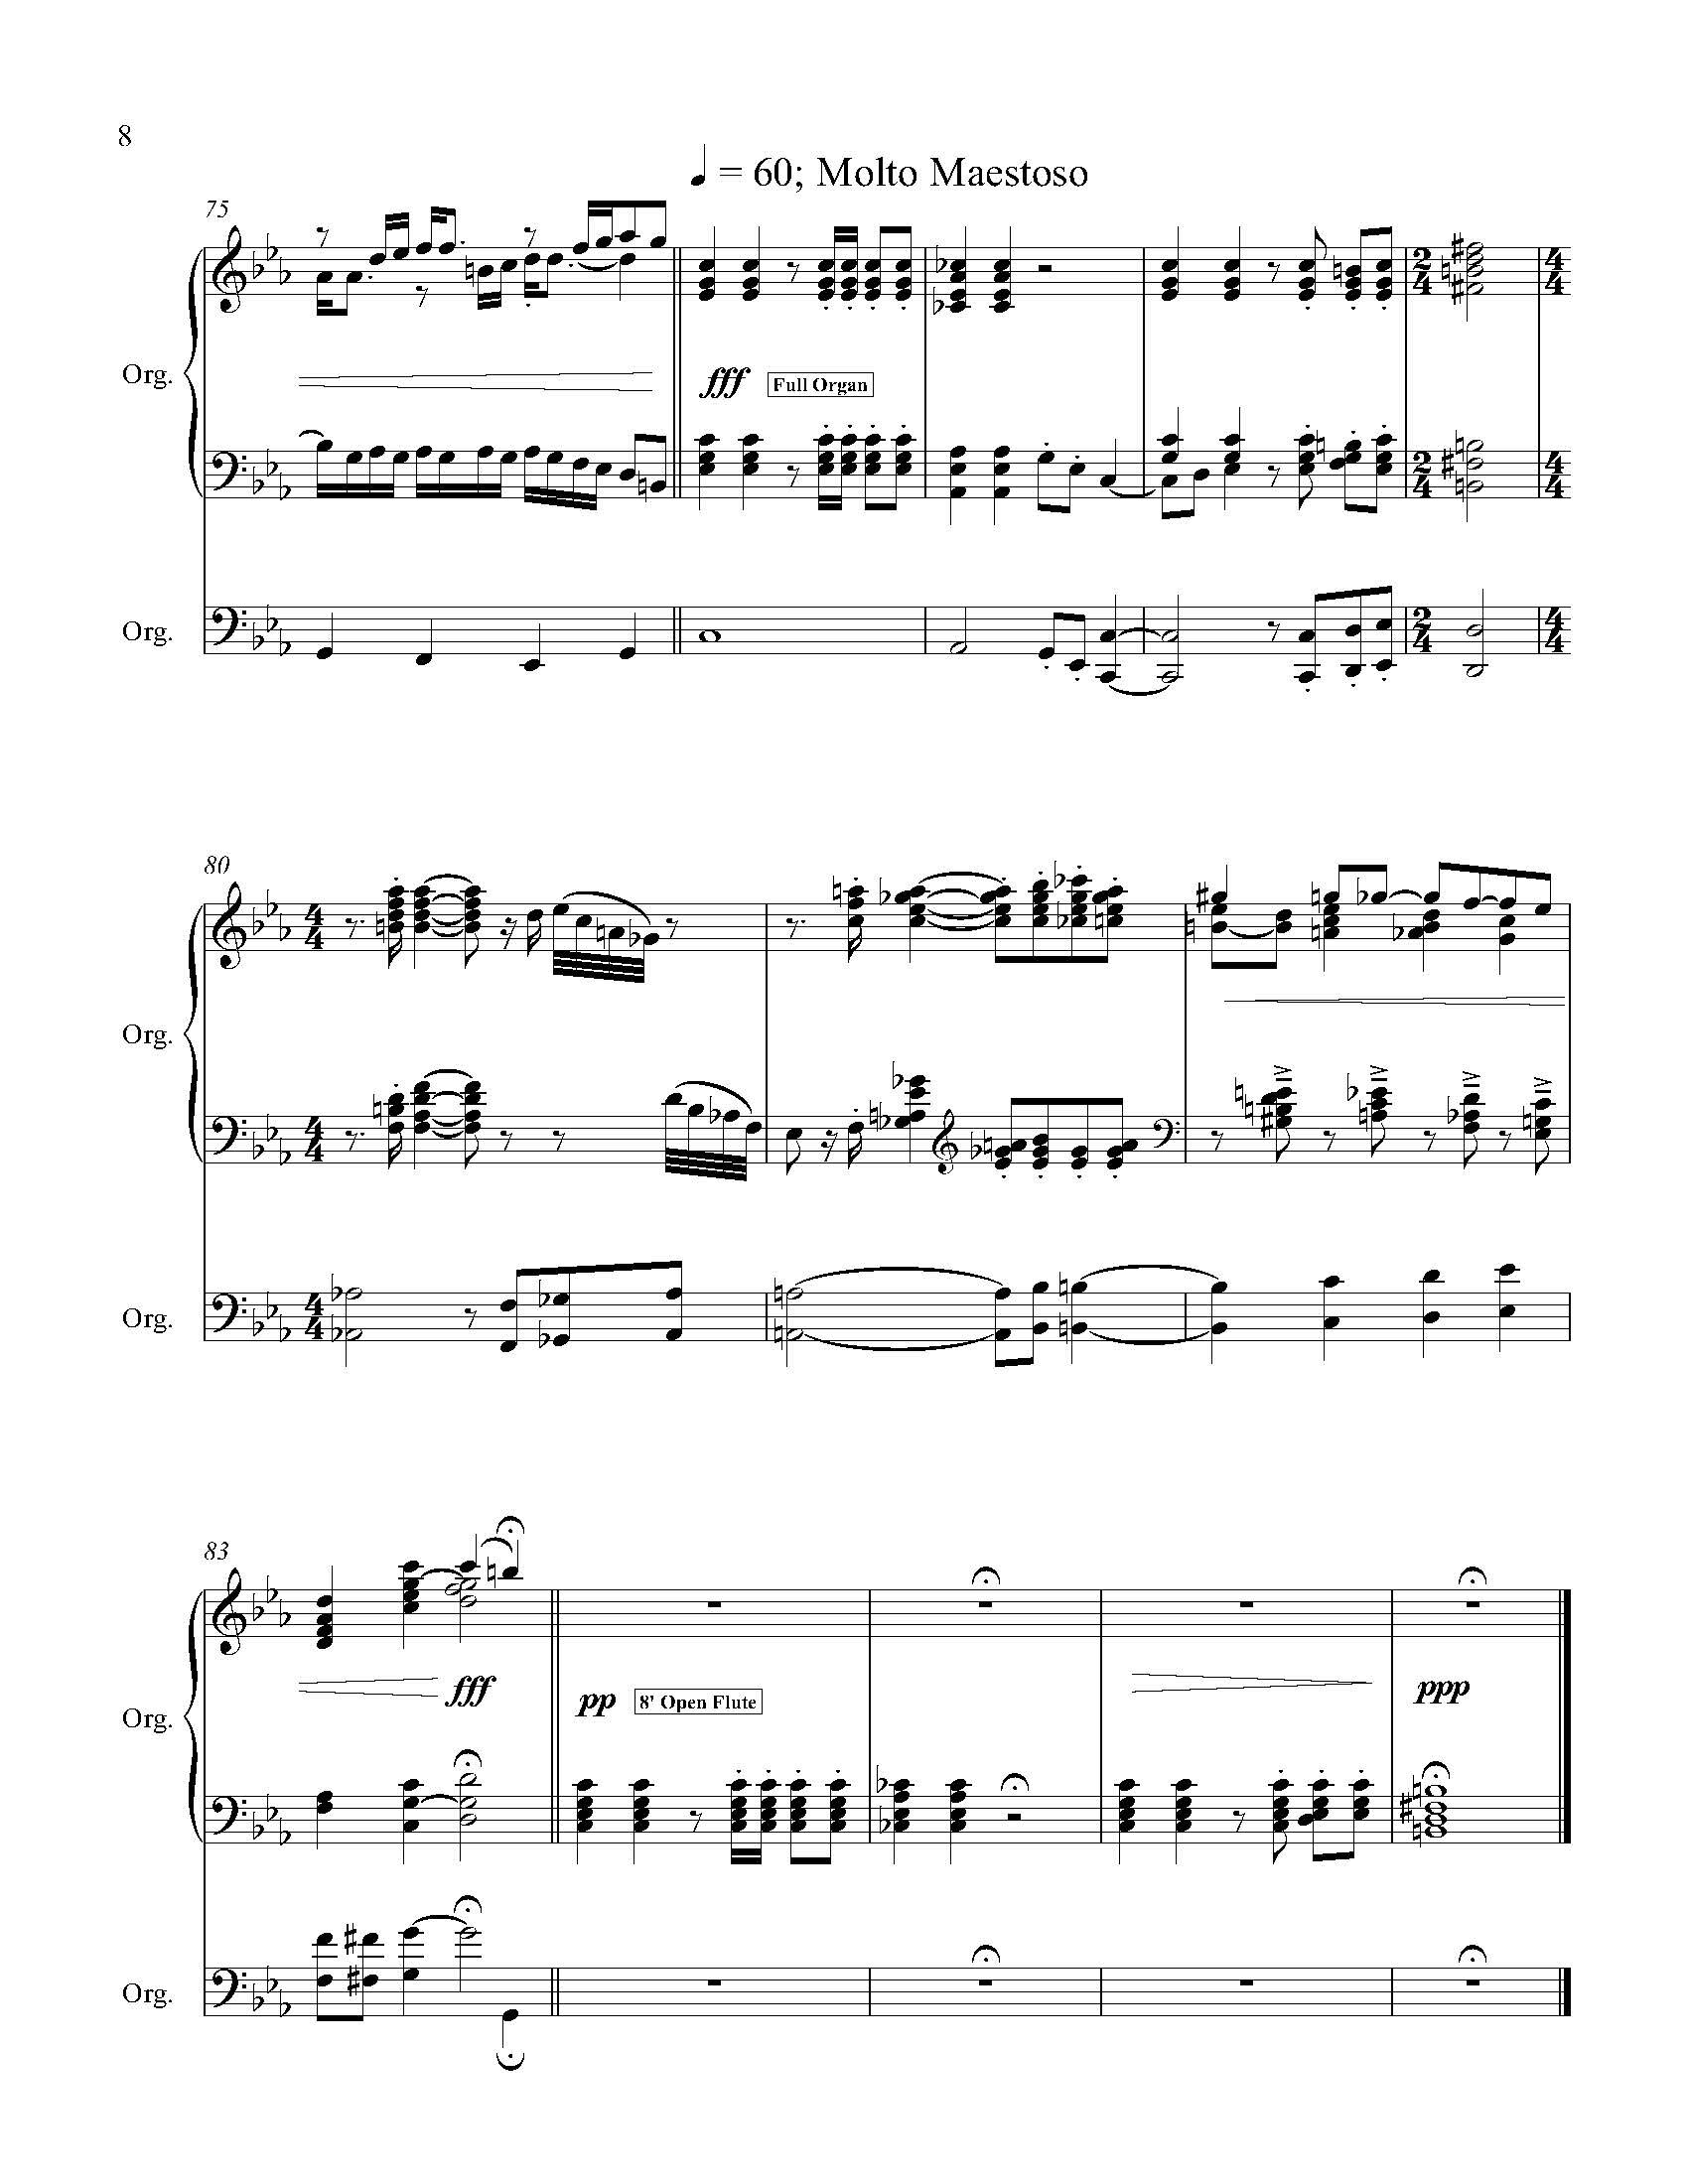 Baroque Fantasy on Go Down Moses - Complete Score_Page_14.jpg